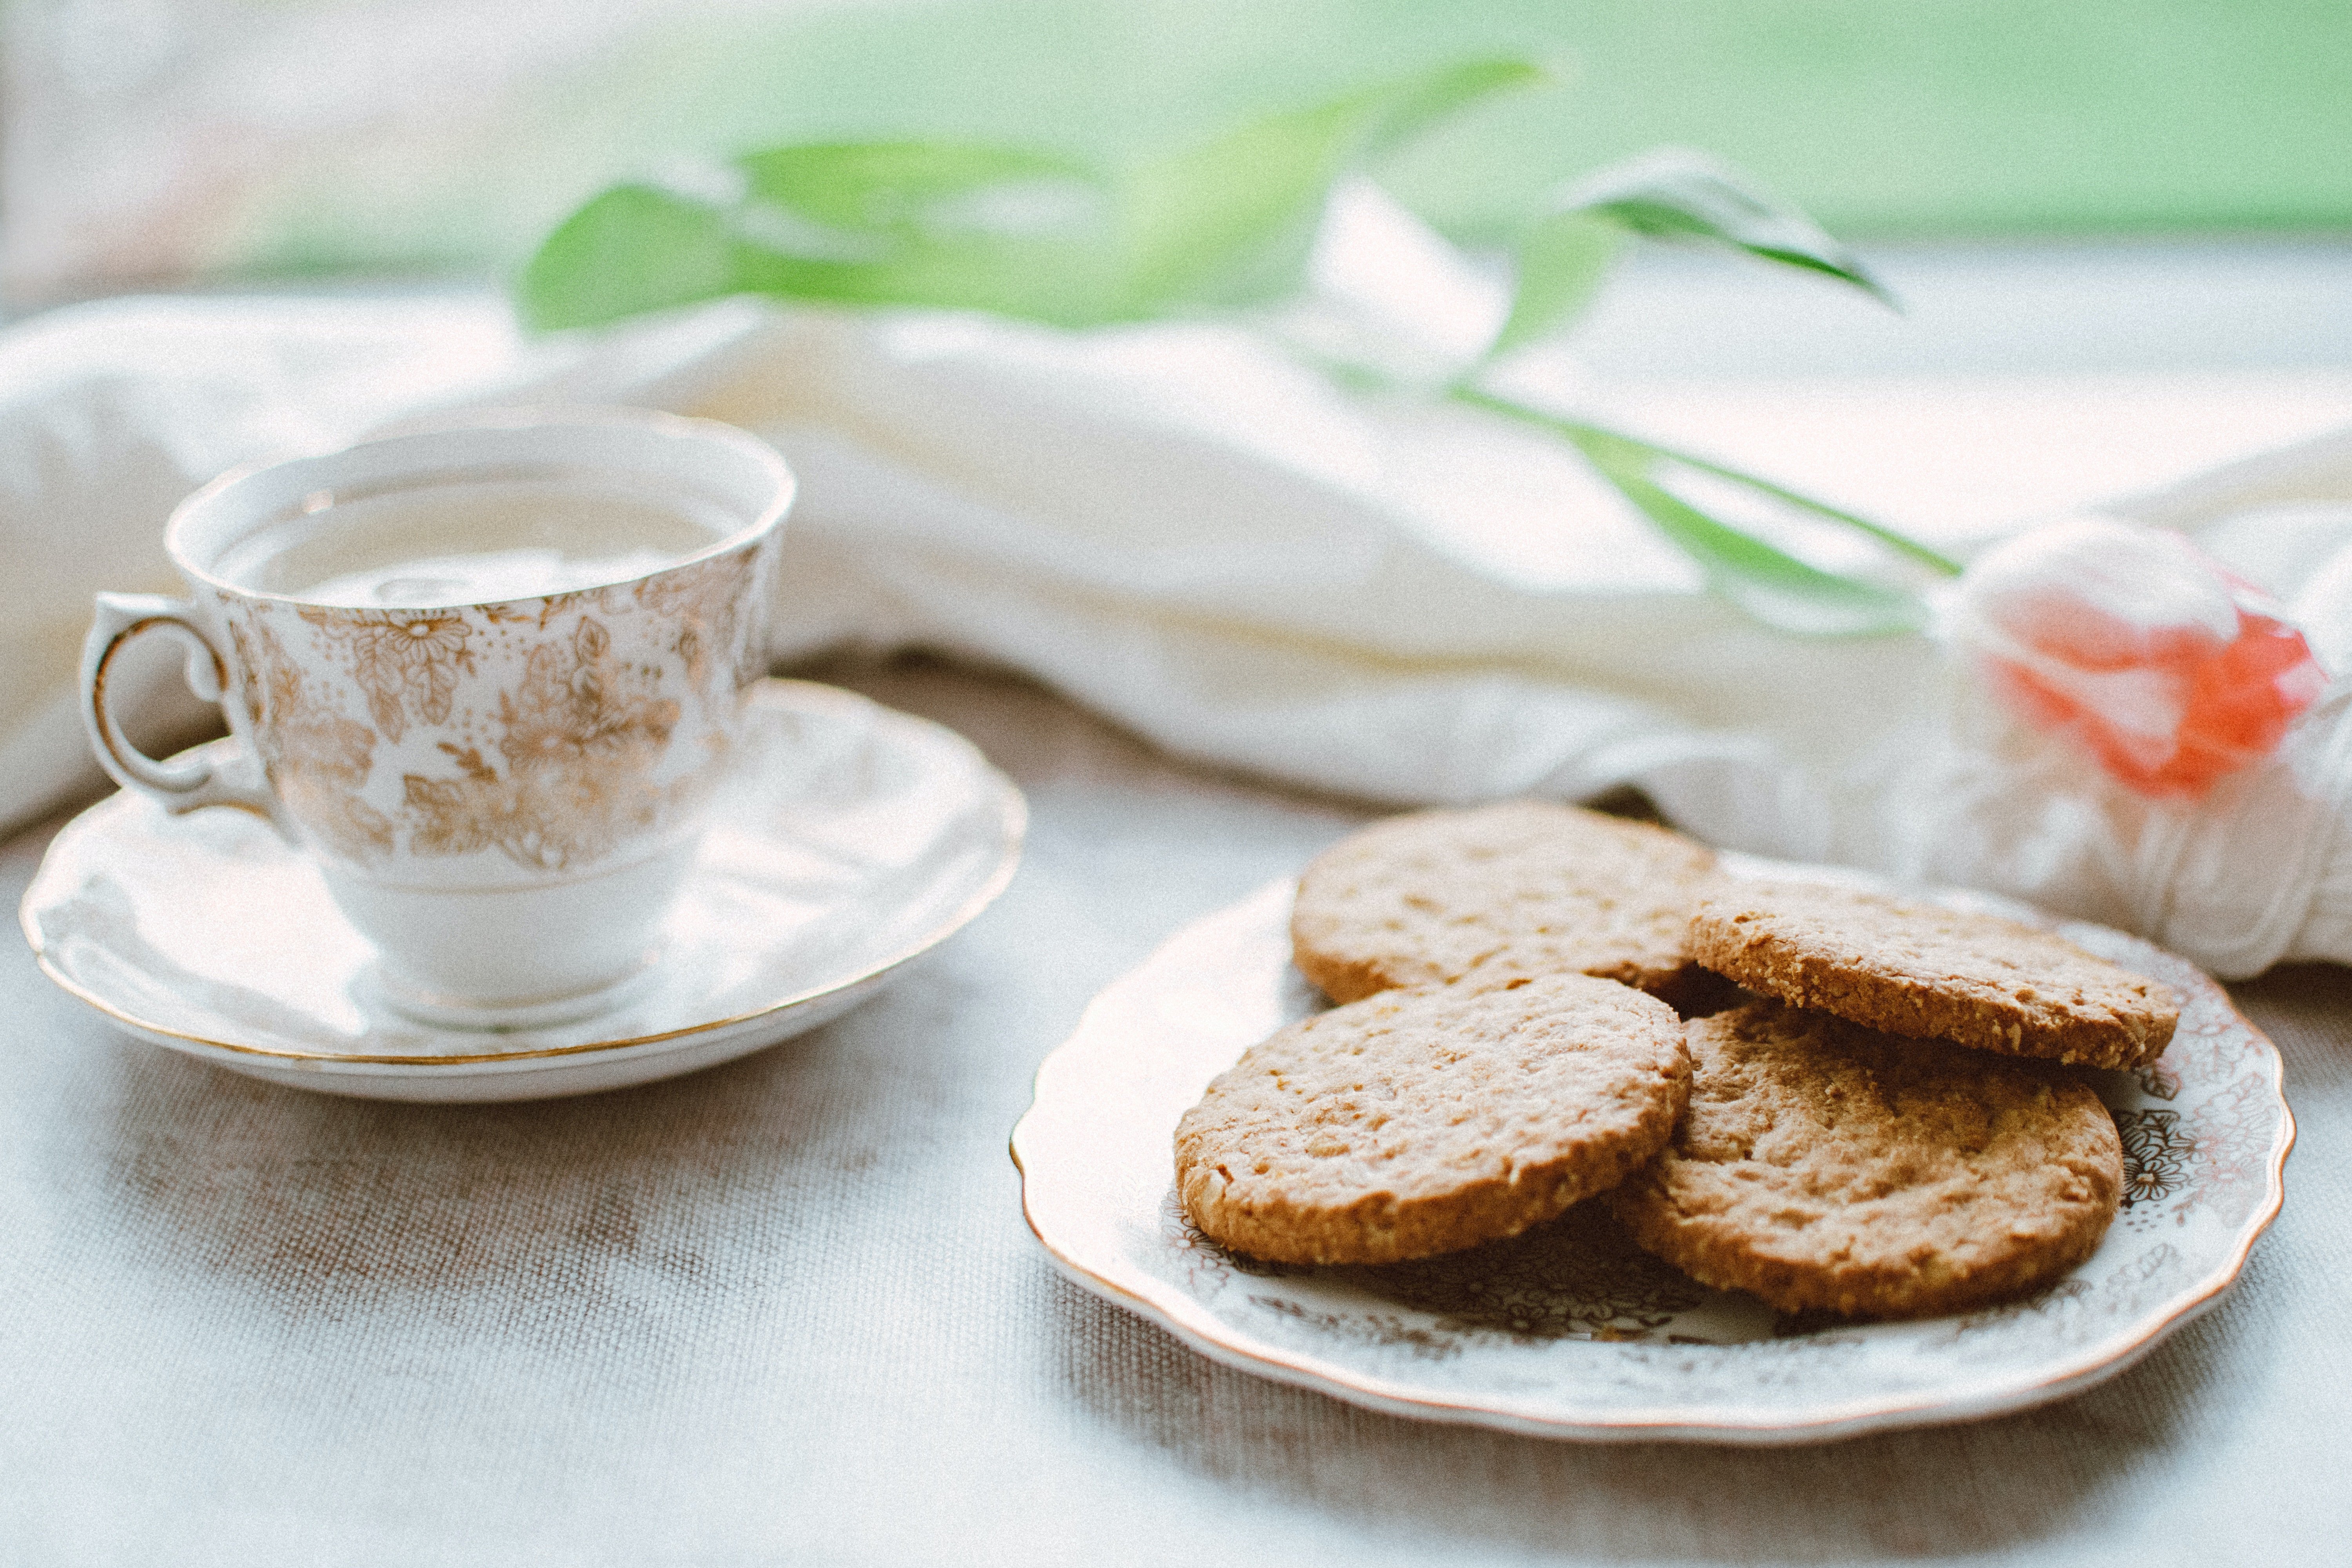 Gabrielle offered Dexter some tea and cookies. | Source: Pexels